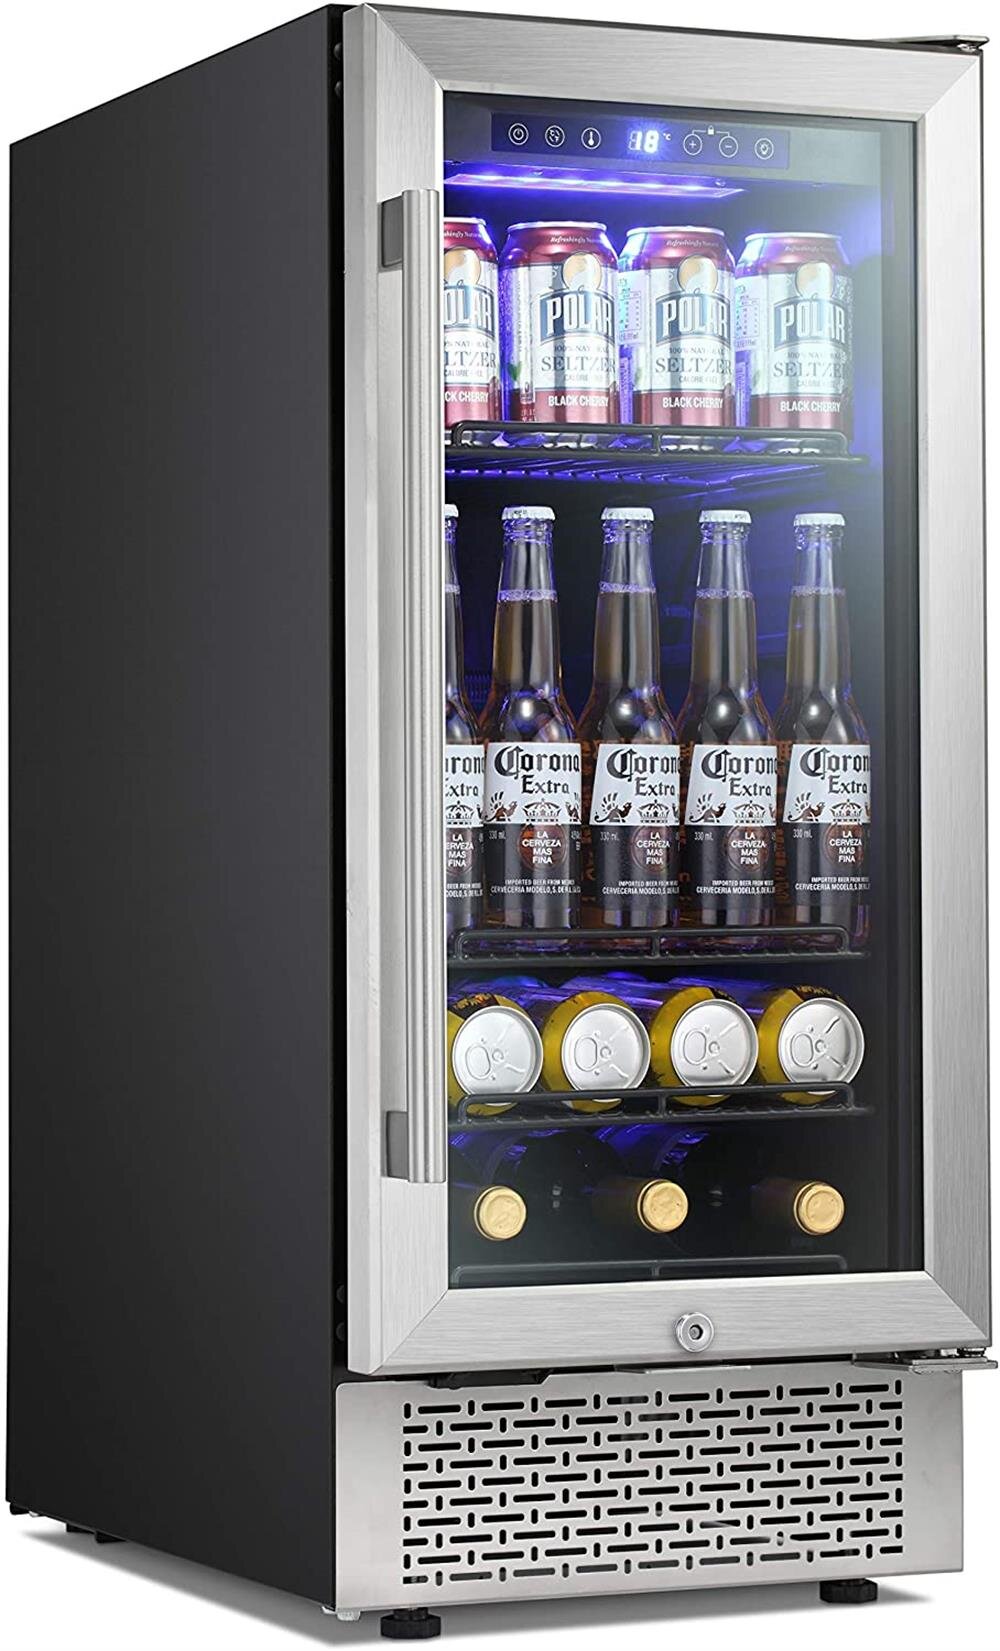 Powerful Drink with Smart Control System and Double-Layer Glass Door Beverage Refrigerator 15 inch Stainless Steel Shelf 88 Can and 3 Bottle Built-in or Freestanding for Soda Beer